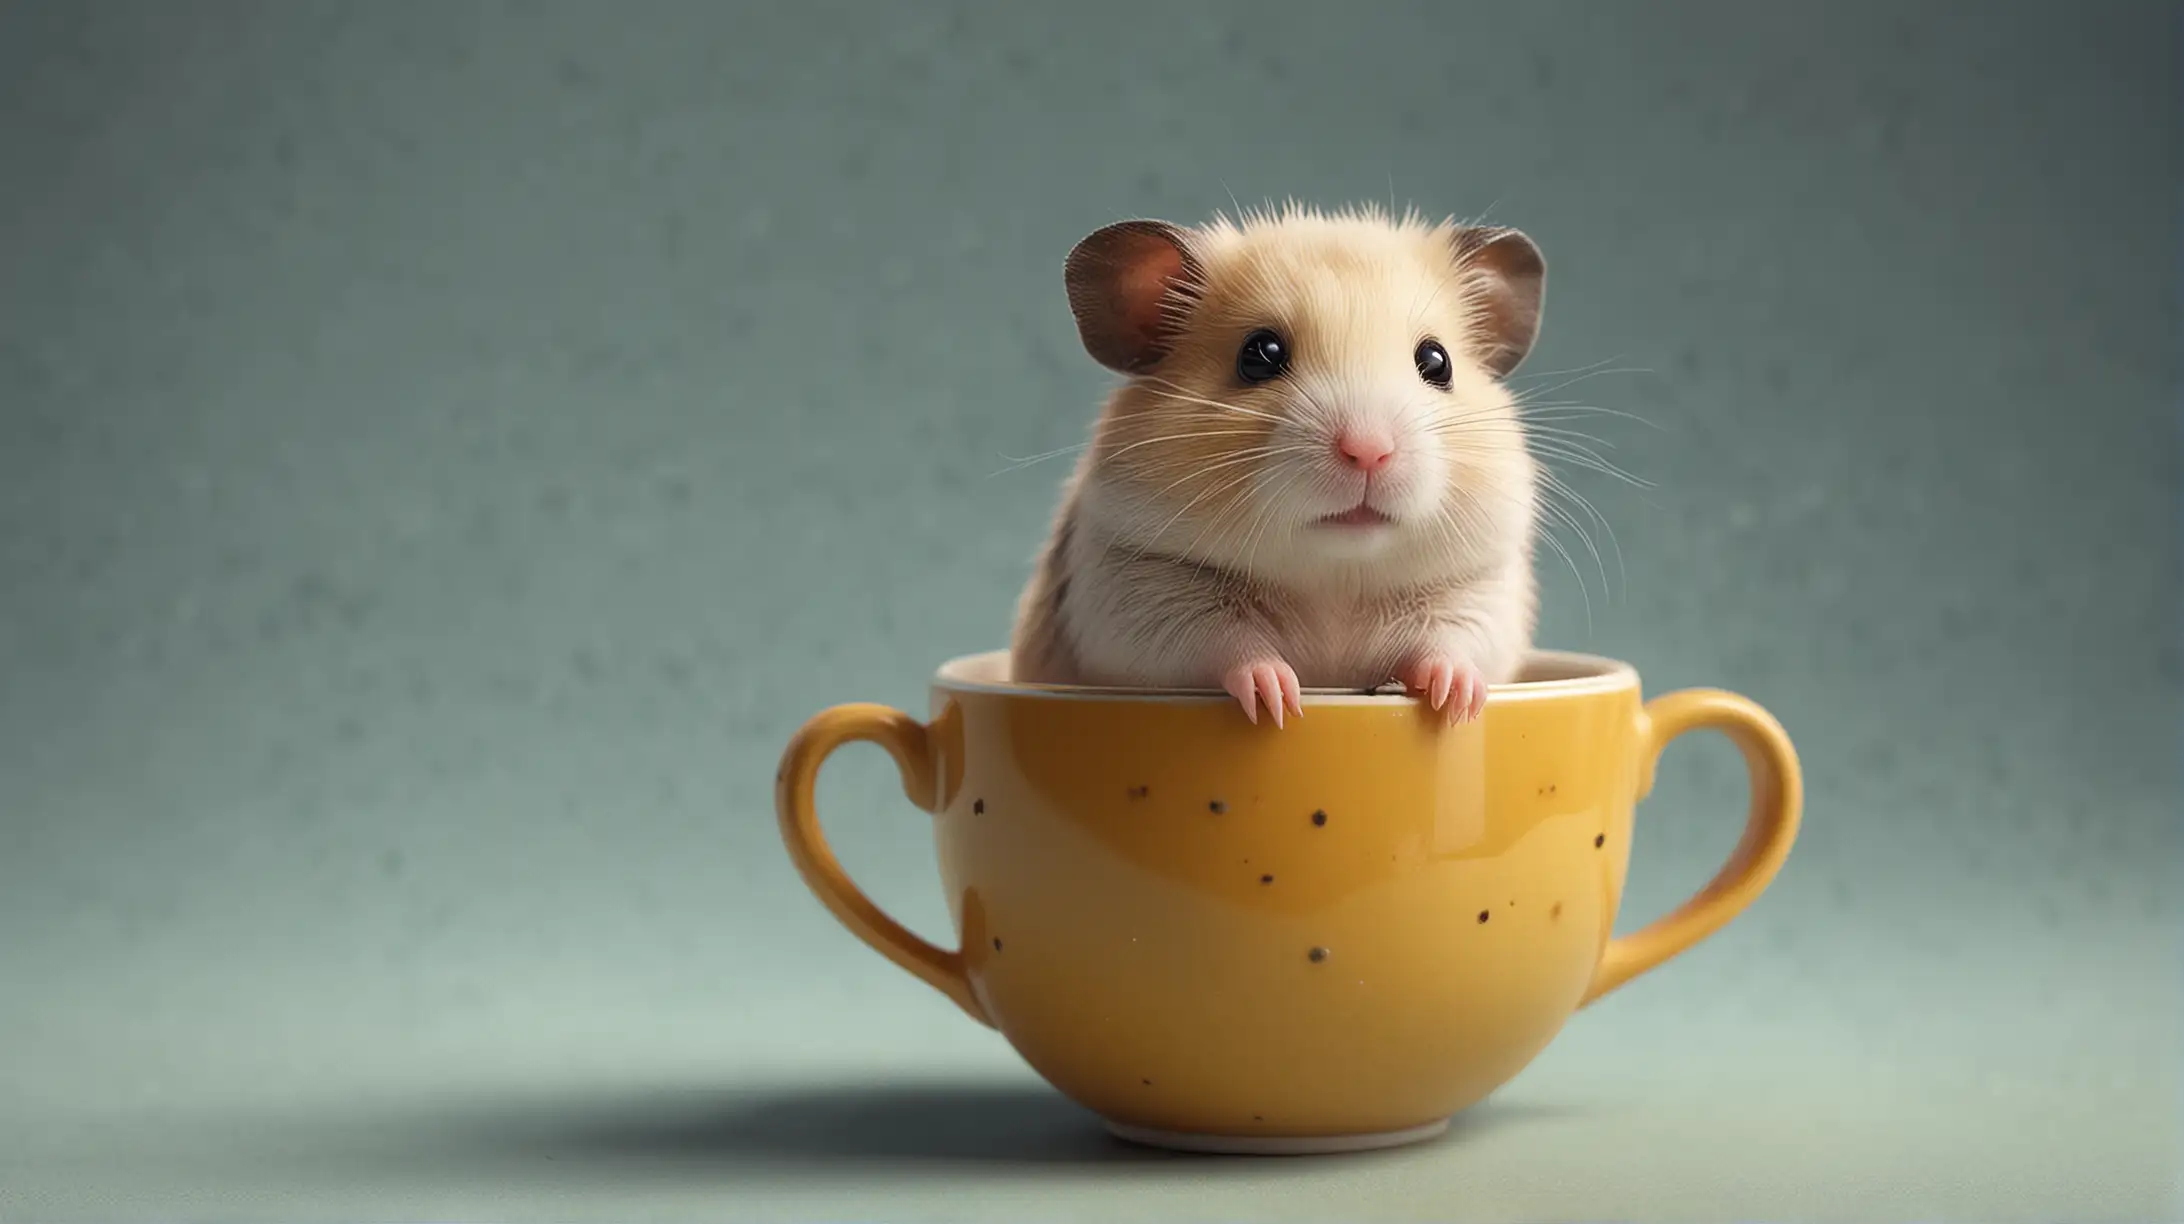 Adorable Tiny Hamster in a Cup Hyper Realistic Animal Portrait